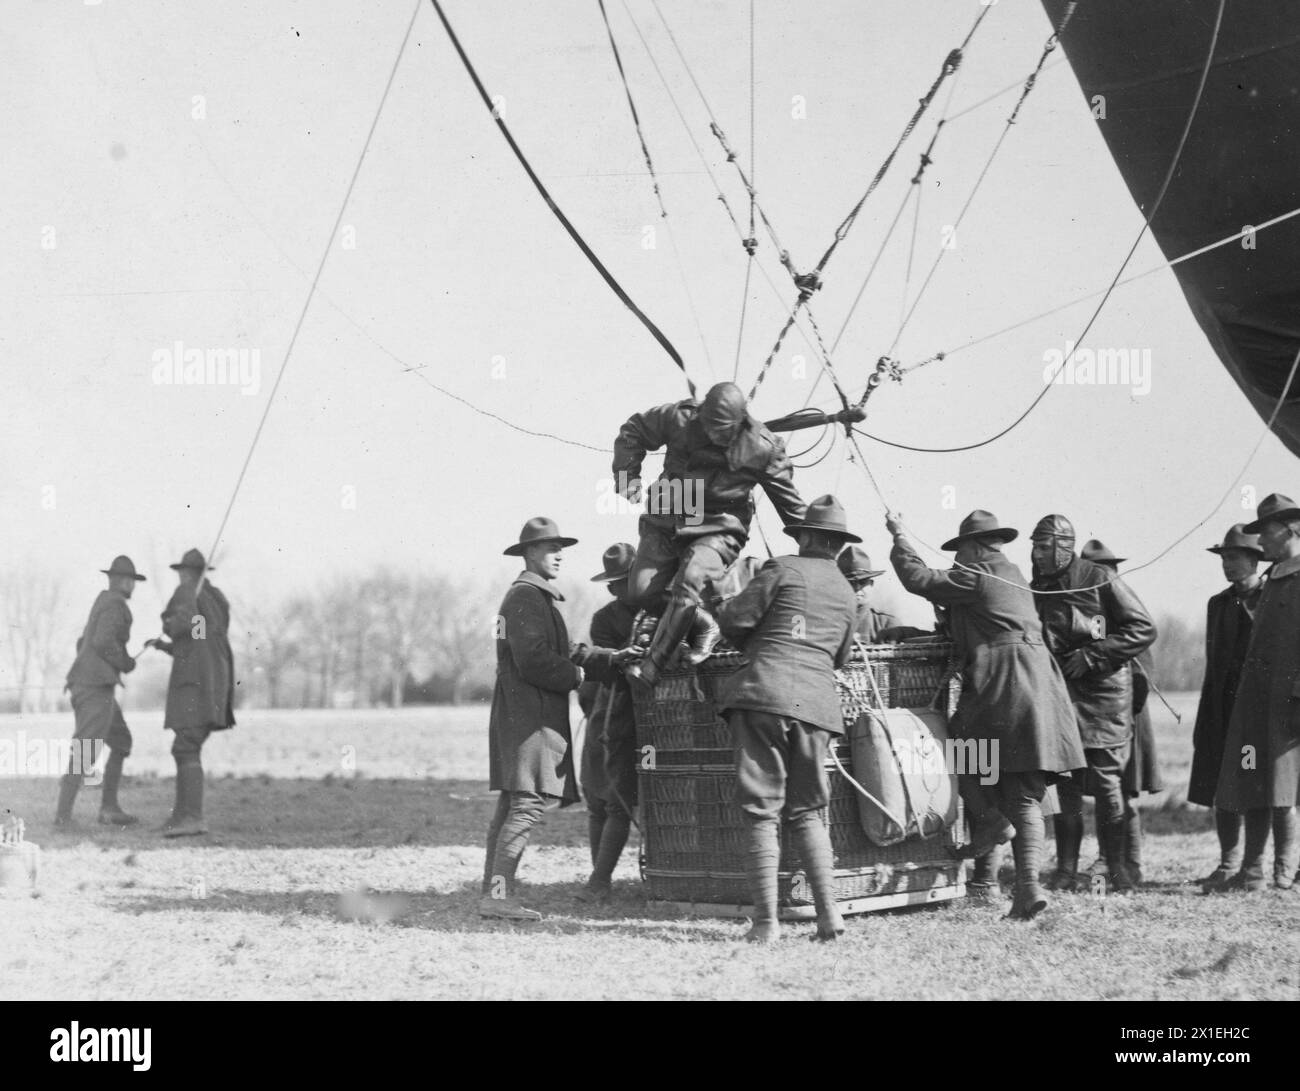 Balloon operations. Passenger jumping from basket of Caquot Balloon operated by 27th Balloon Co., Polo Field, Washington, D.C ca. 1919 Stock Photo